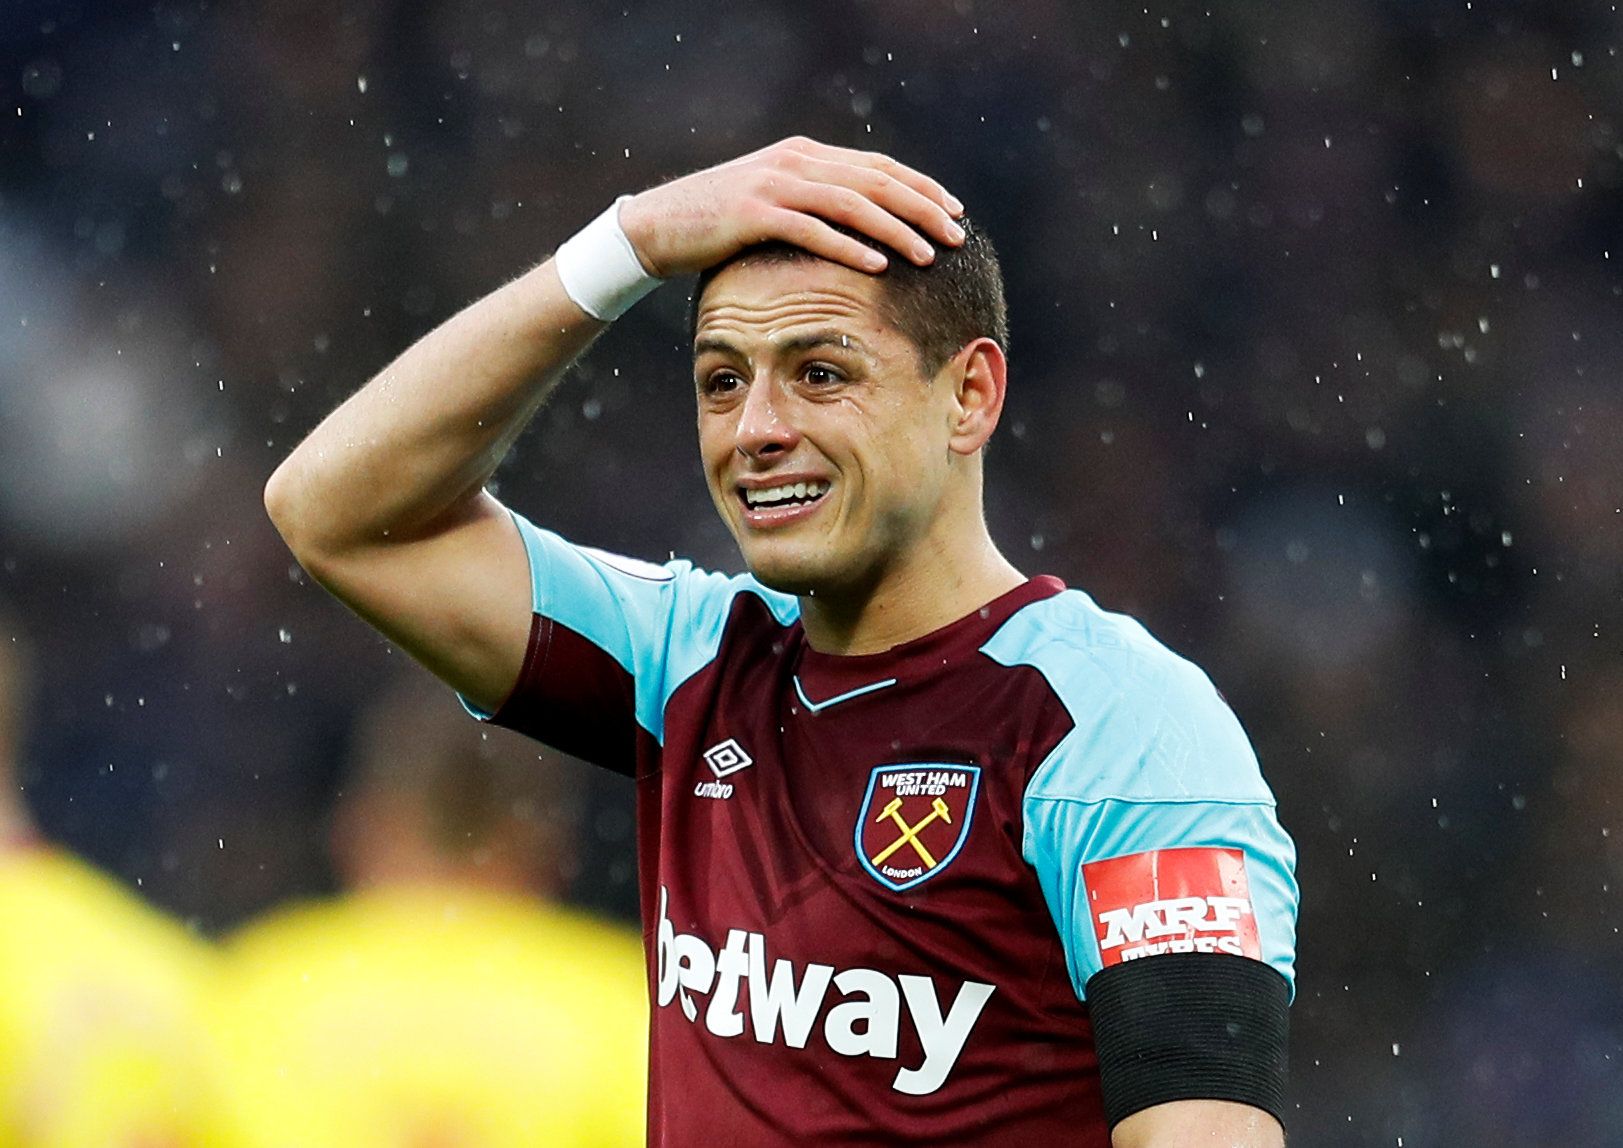 Soccer Football - Premier League - West Ham United vs Watford - London Stadium, London, Britain - February 10, 2018   West Ham United's Javier Hernandez reacts after his goal is disallowed   REUTERS/Peter Nicholls    EDITORIAL USE ONLY. No use with unauthorized audio, video, data, fixture lists, club/league logos or 